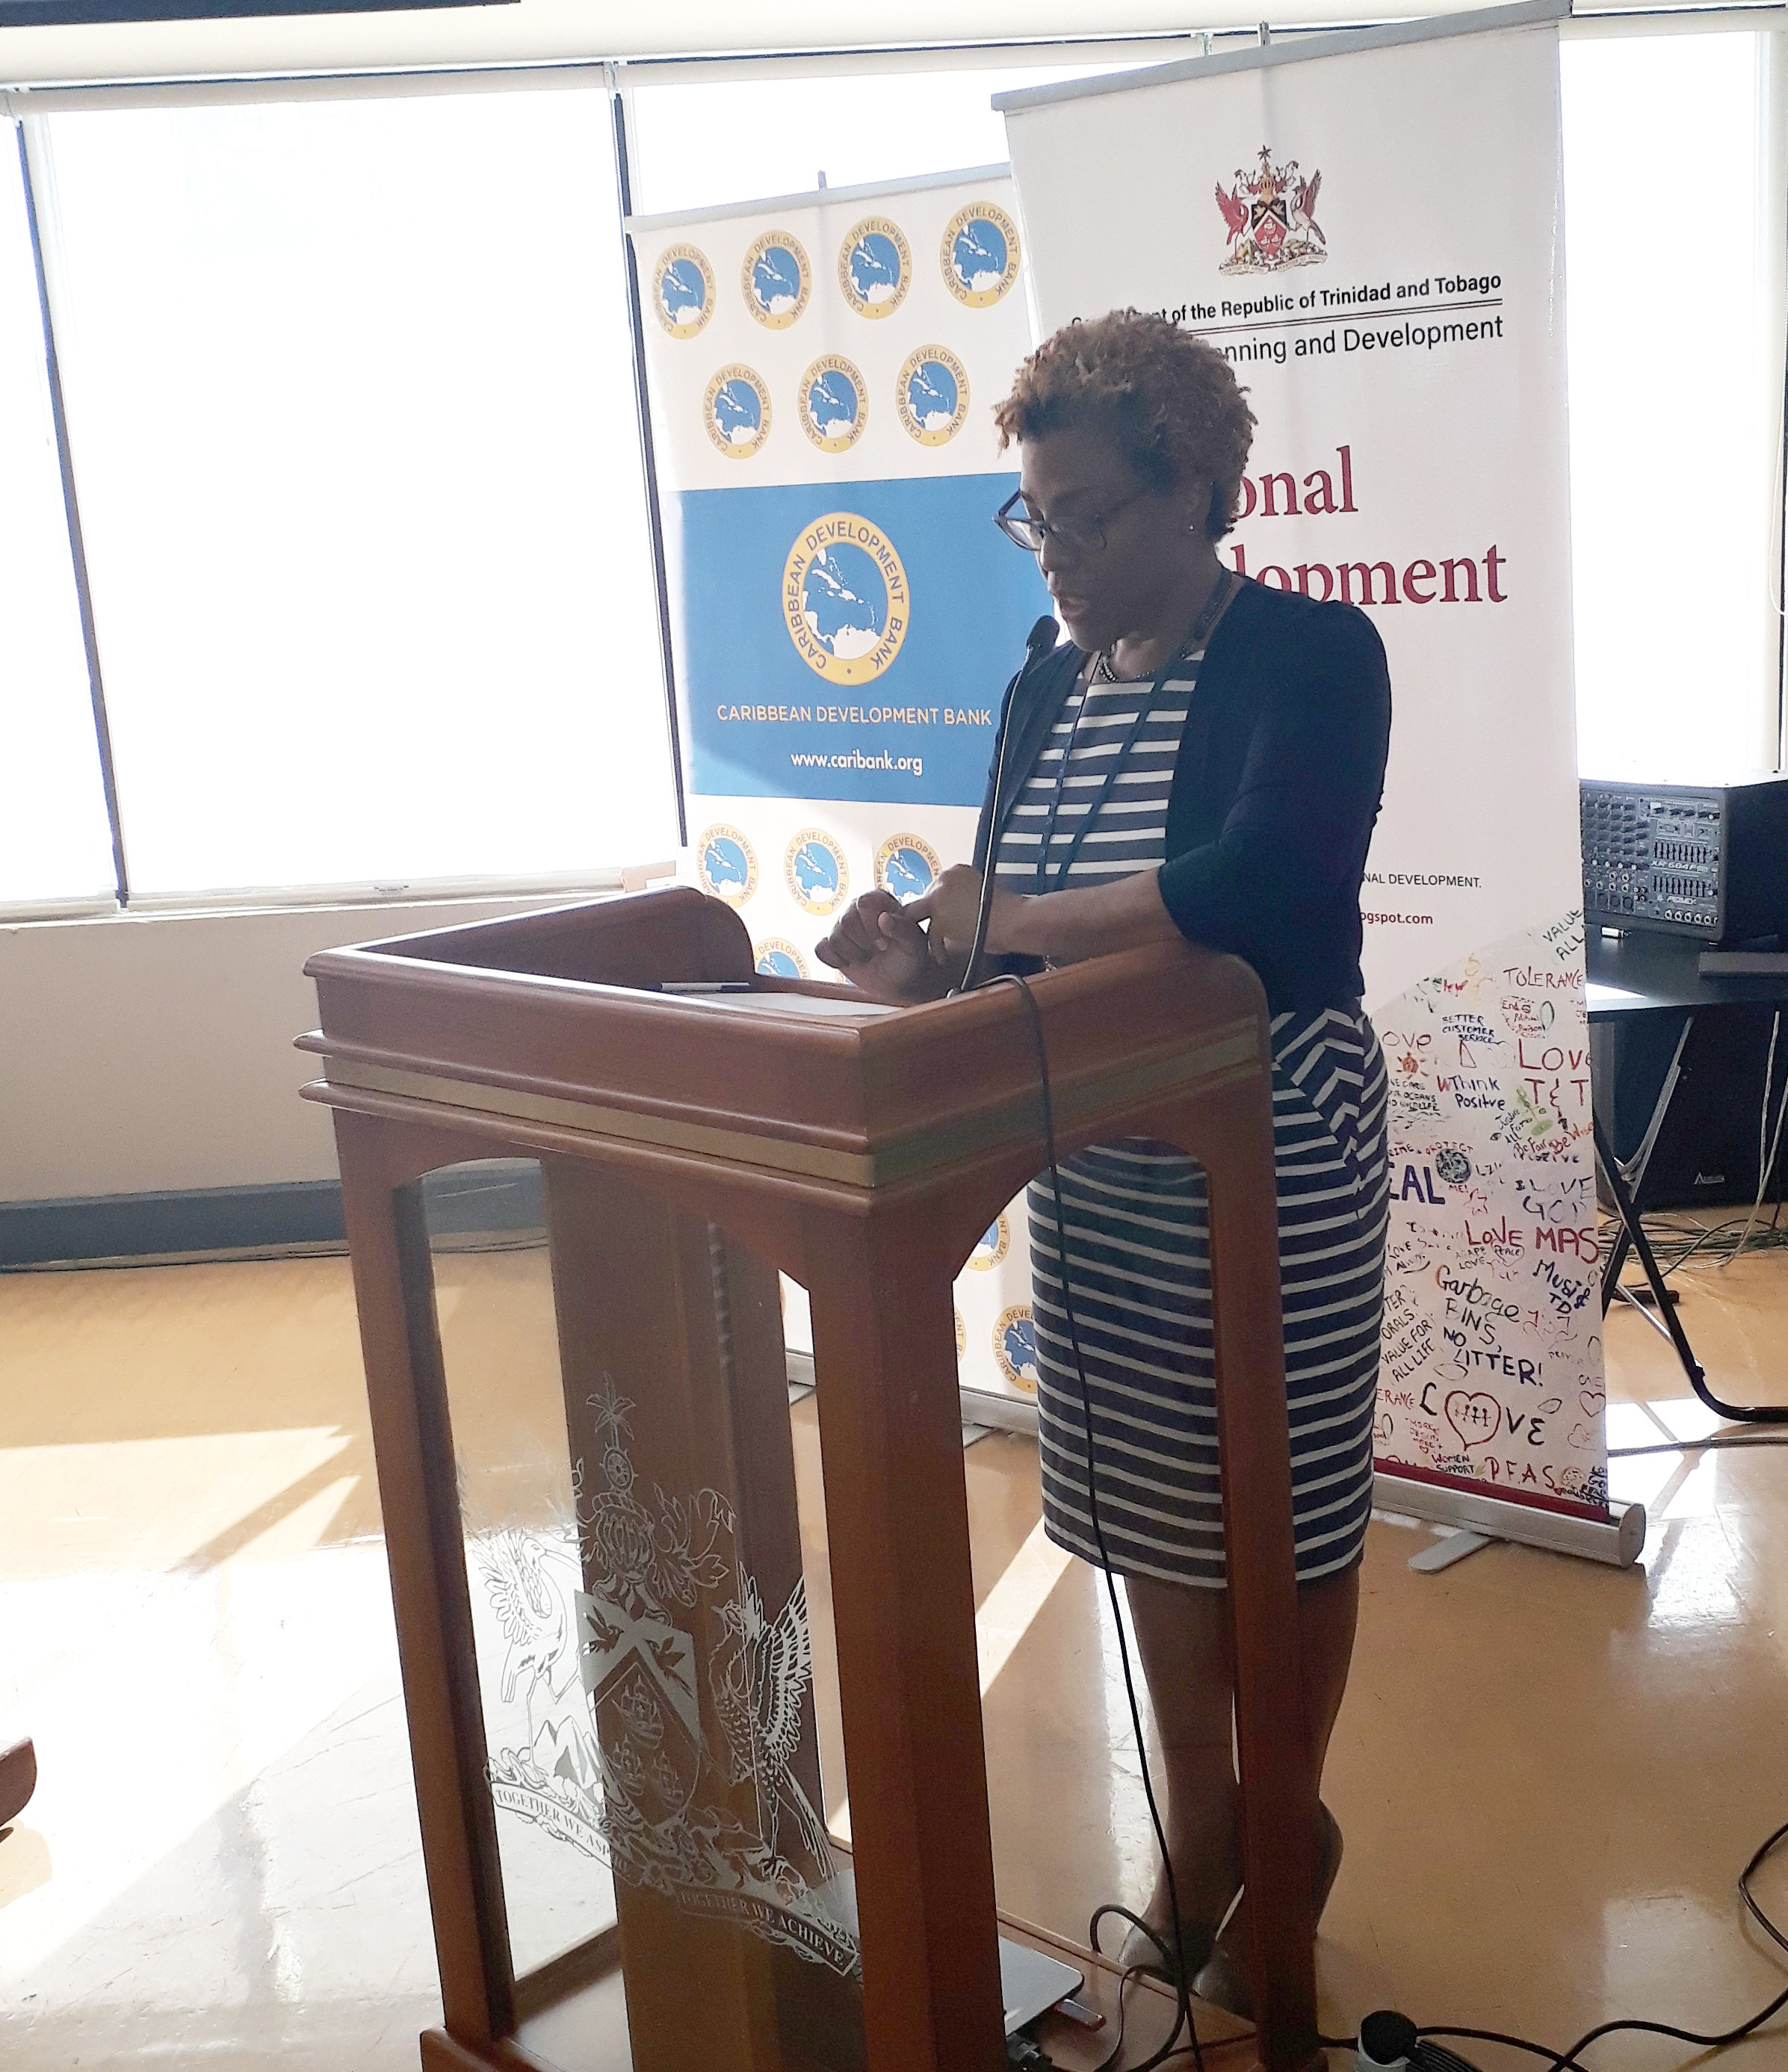 A more efficient public service sector is part of Trinidad and Tobago’s Vision 2030, and PPAM/PCM will help to achieve that says Marie Hinds, Deputy Permanent Secretary, Ministry of Planning and Development.